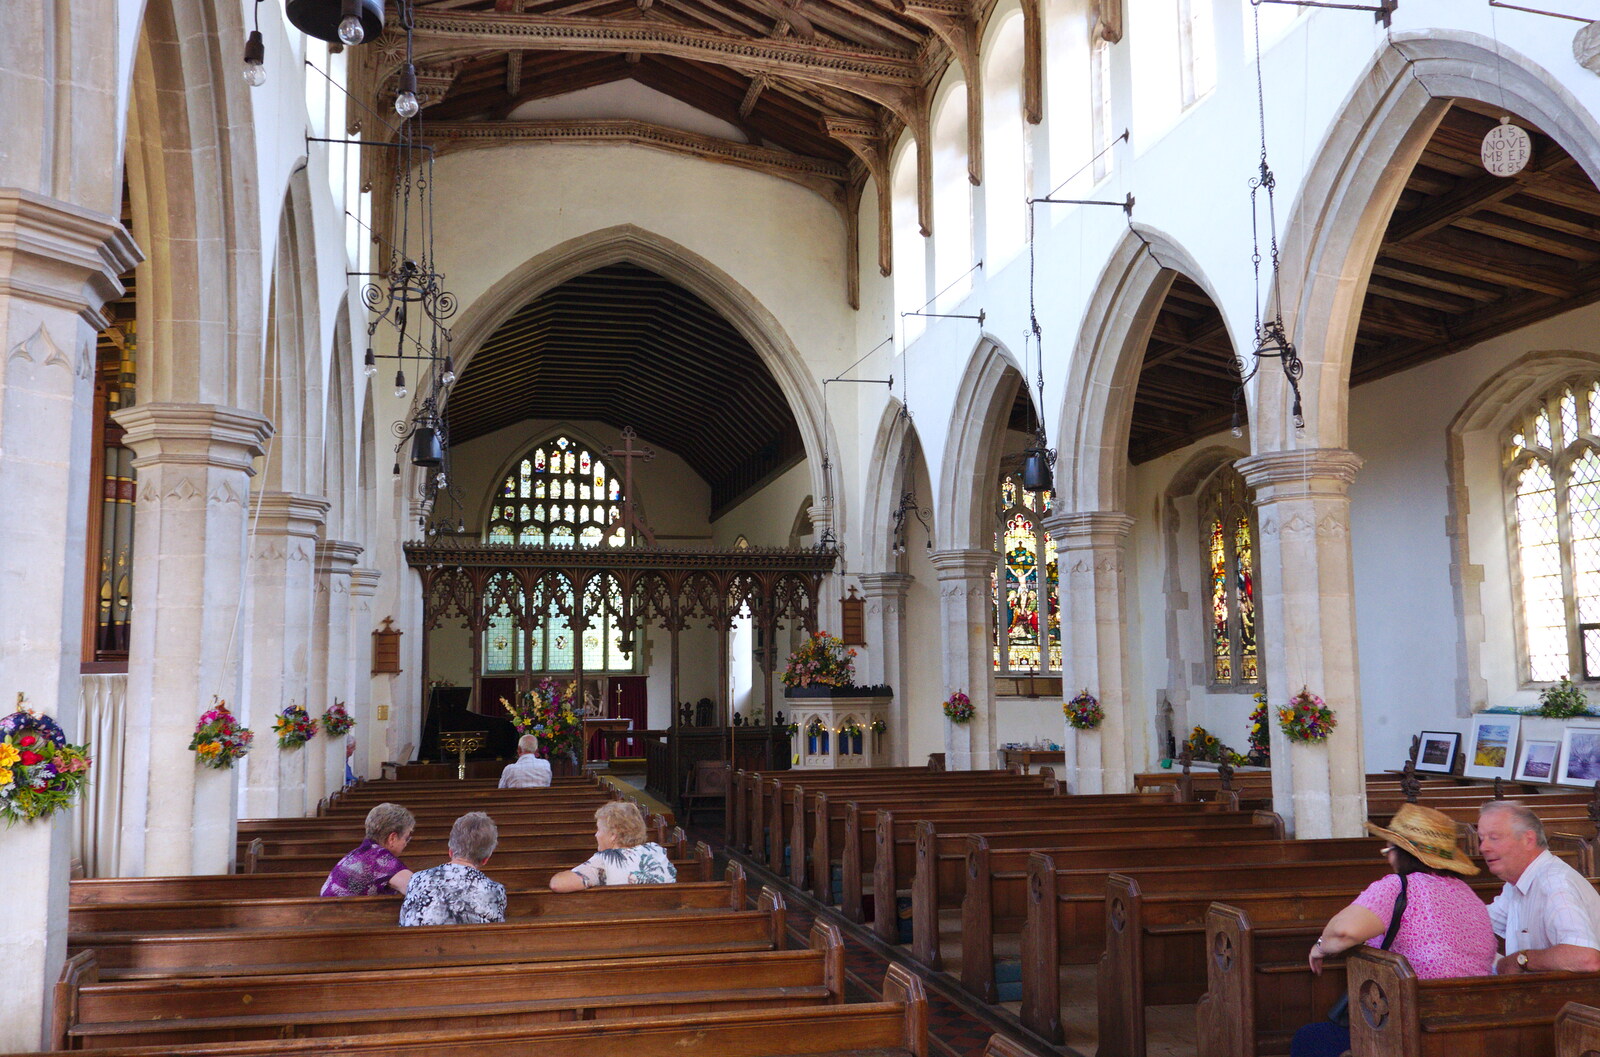 The nave of St. Mary's Church from The Gislingham Silver Band at Walsham Le Willows, Suffolk - 26th August 2019